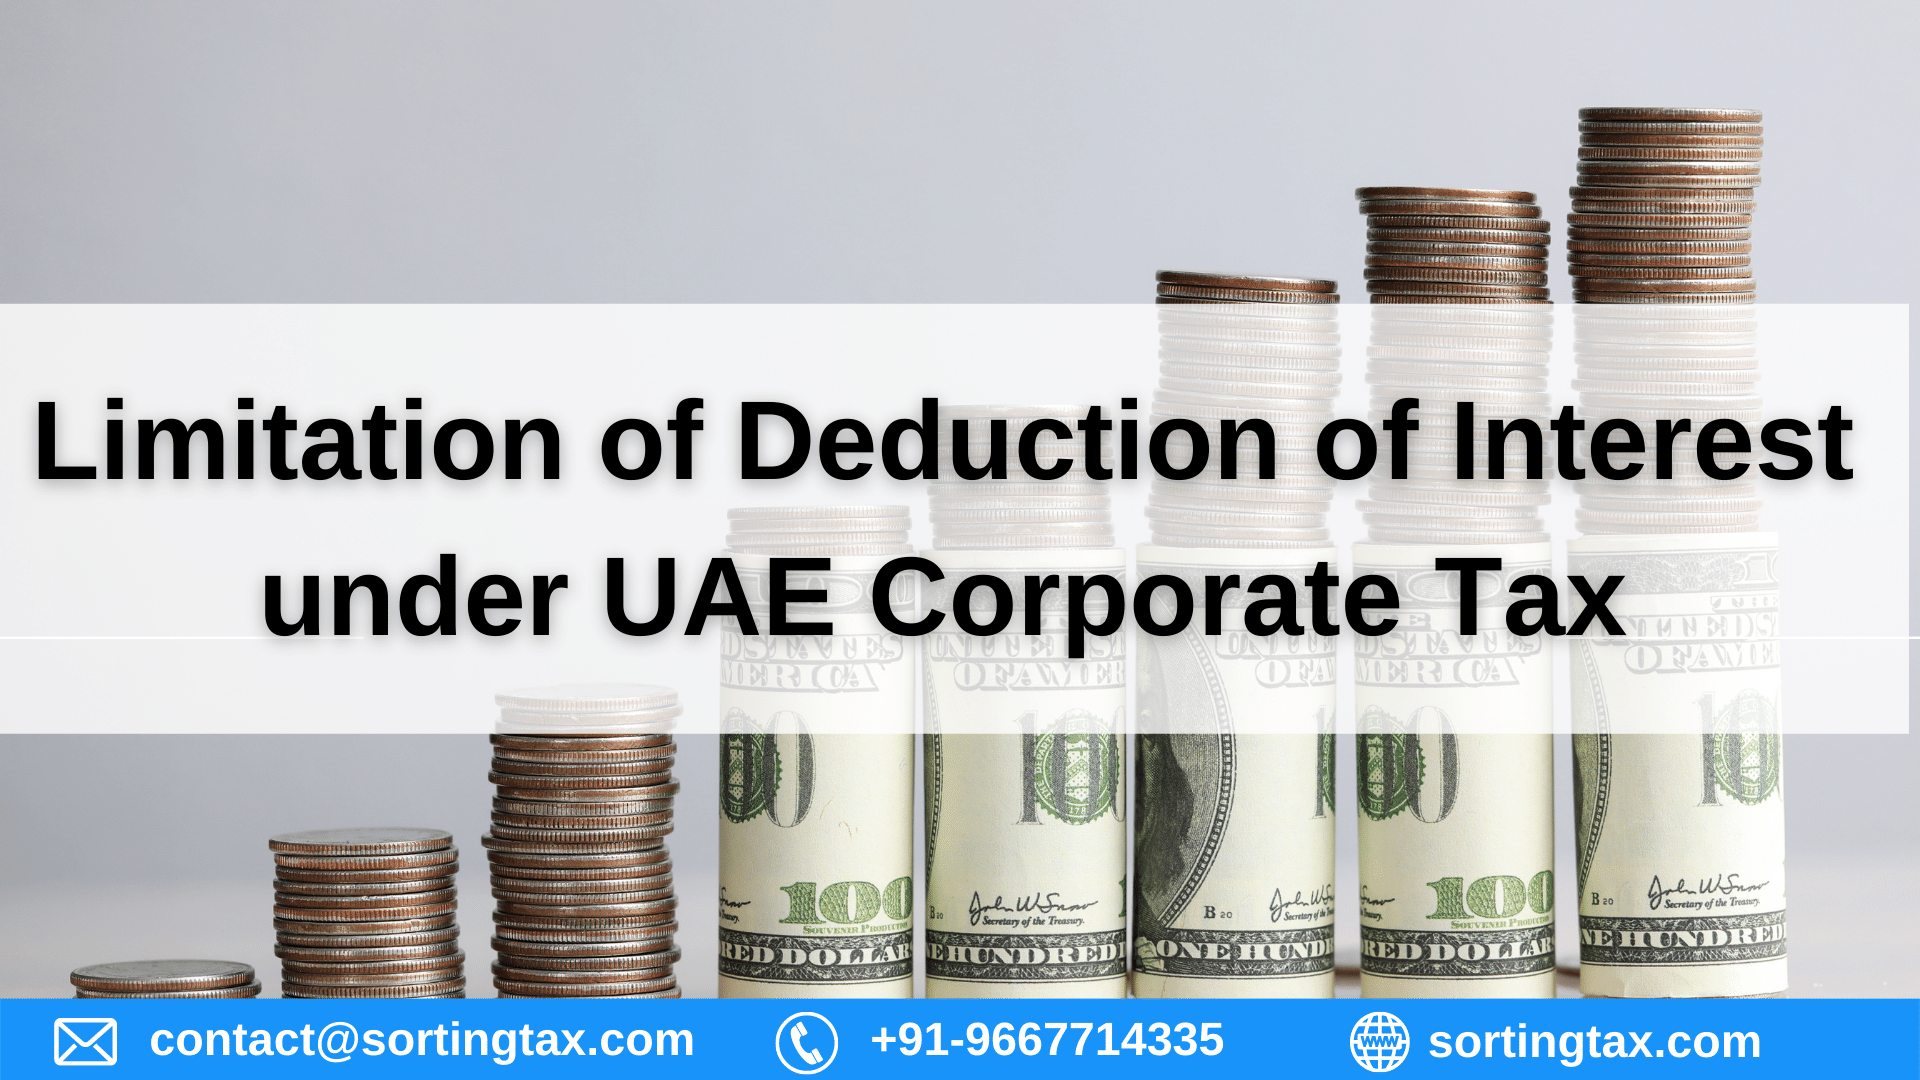 Limitation of Deduction of Interest under UAE Corporate Tax